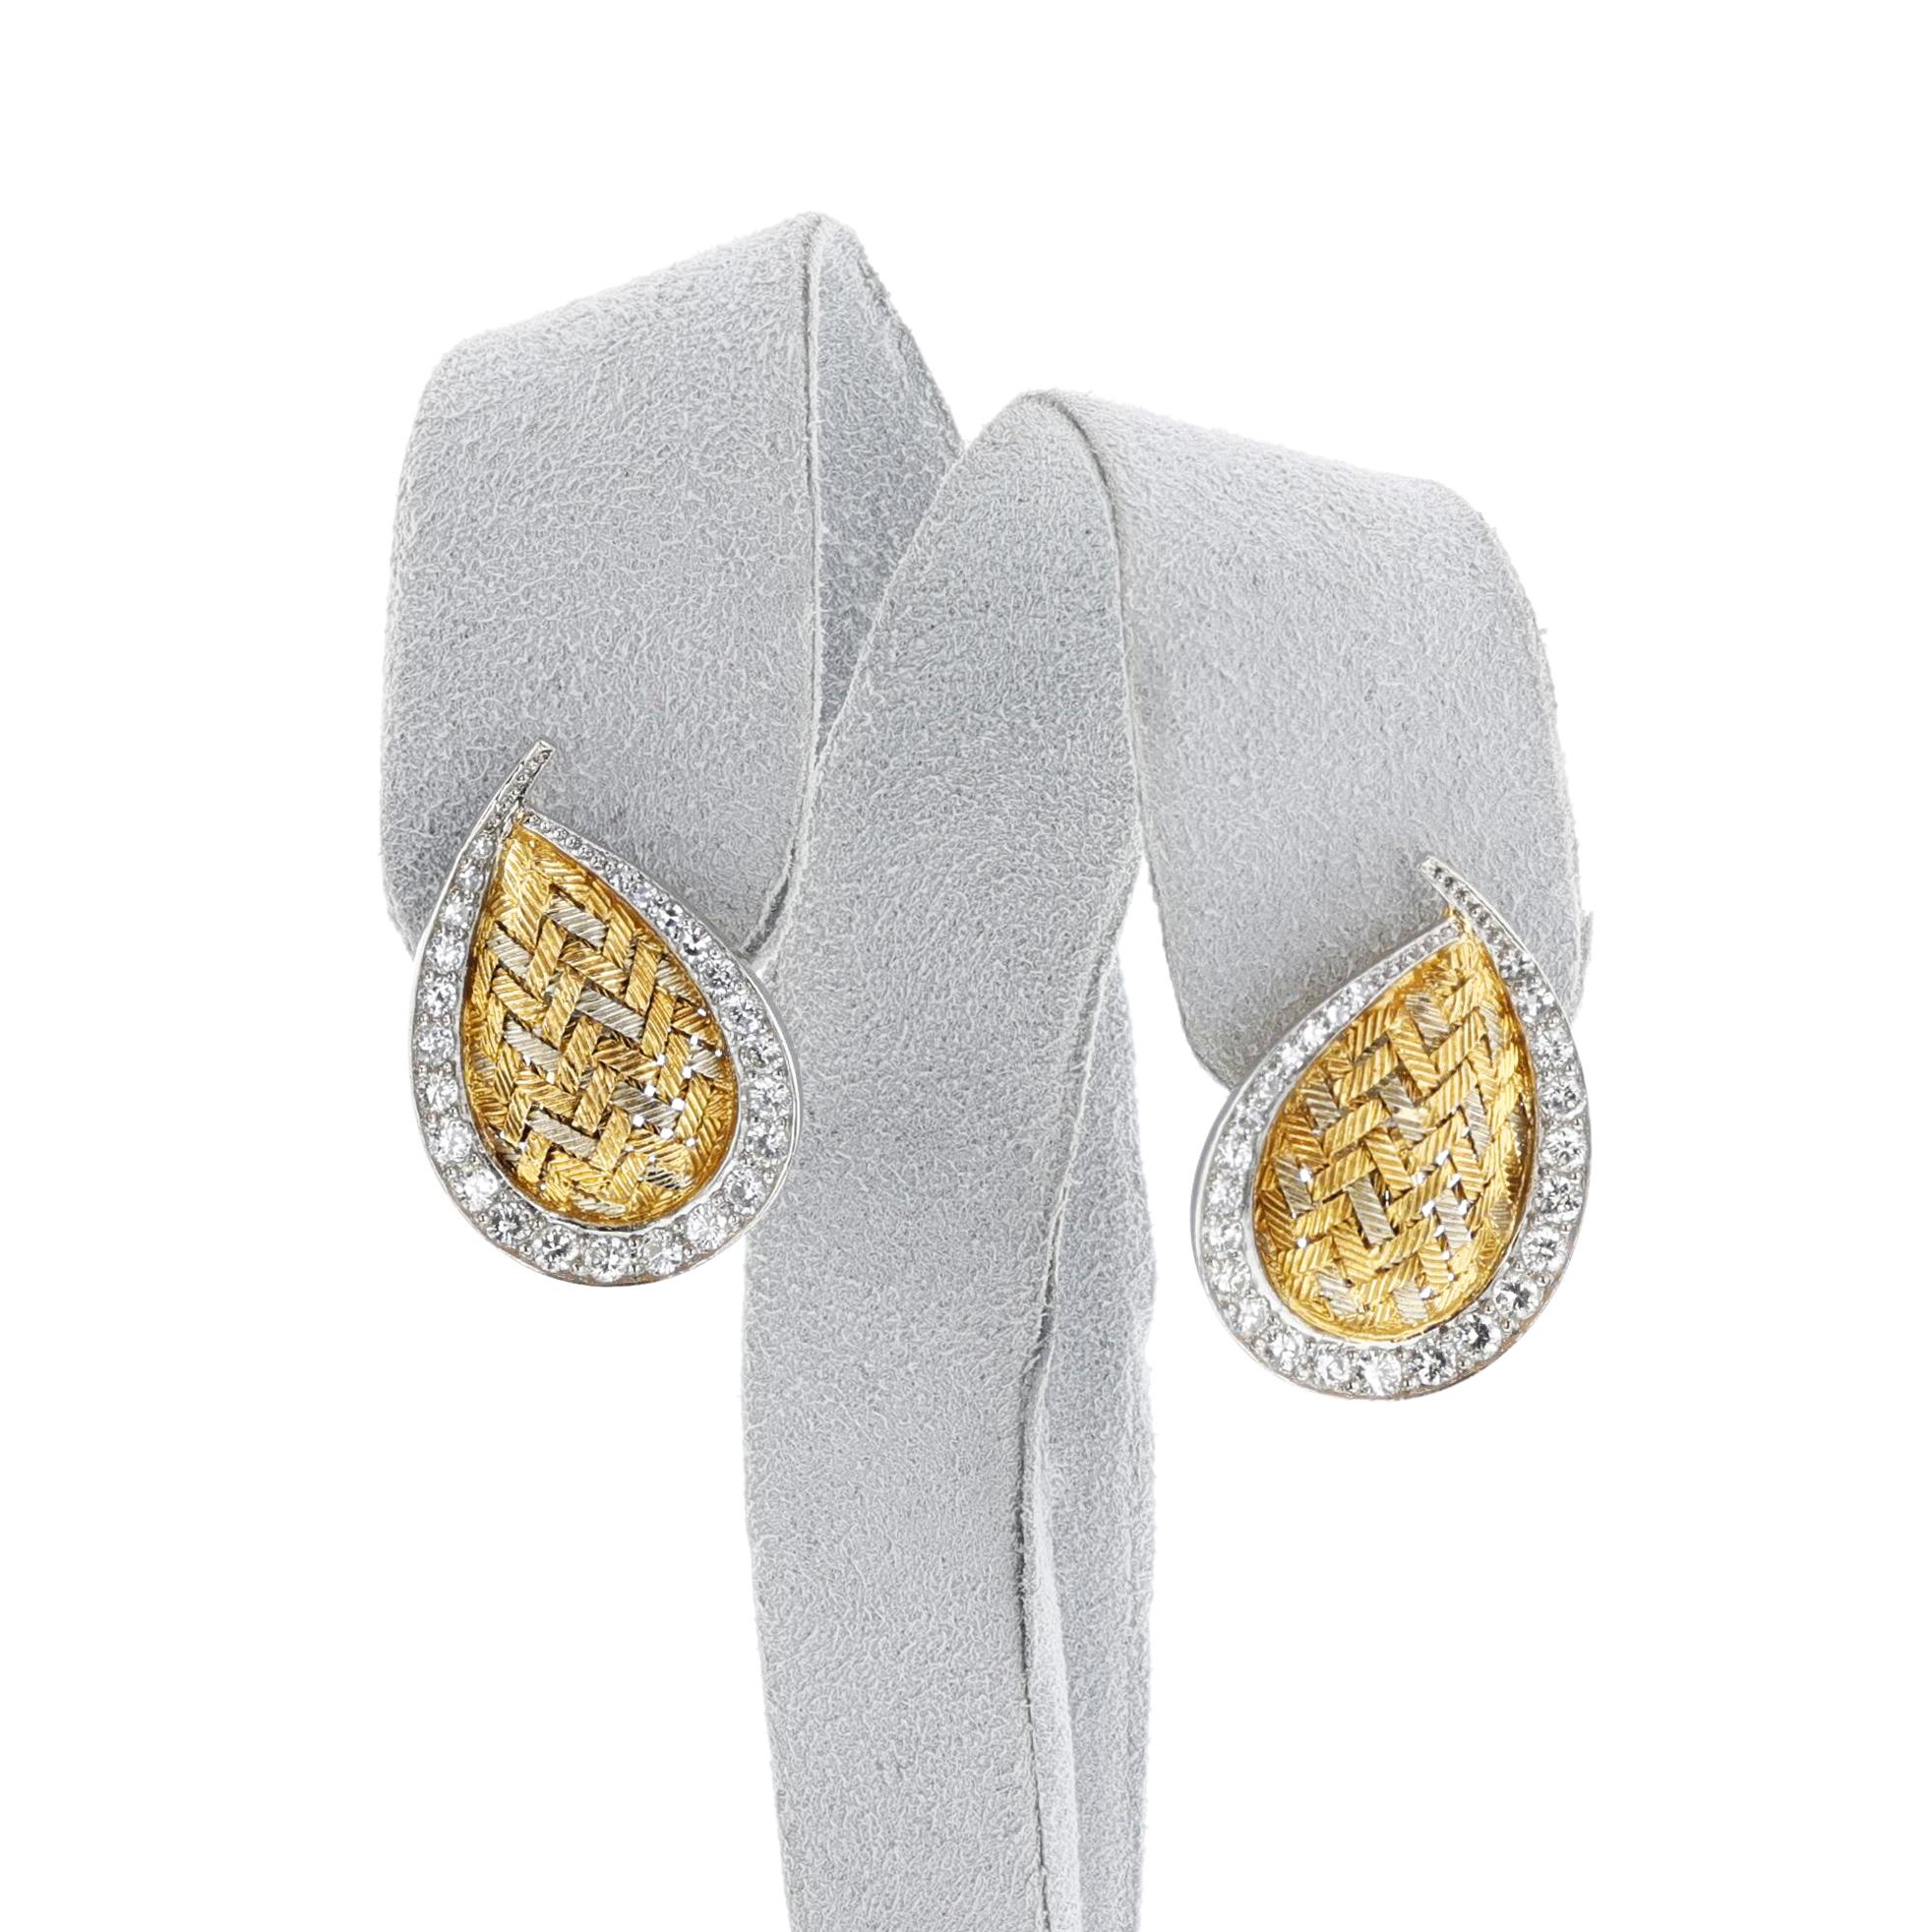 Merrin France Diamond and Texted Gold Pear Shape Leaf Earrings made in 18k gold. The total weight is 13.3 grams. The length is 1 inch.

SKU: 1482-AFEJPRT